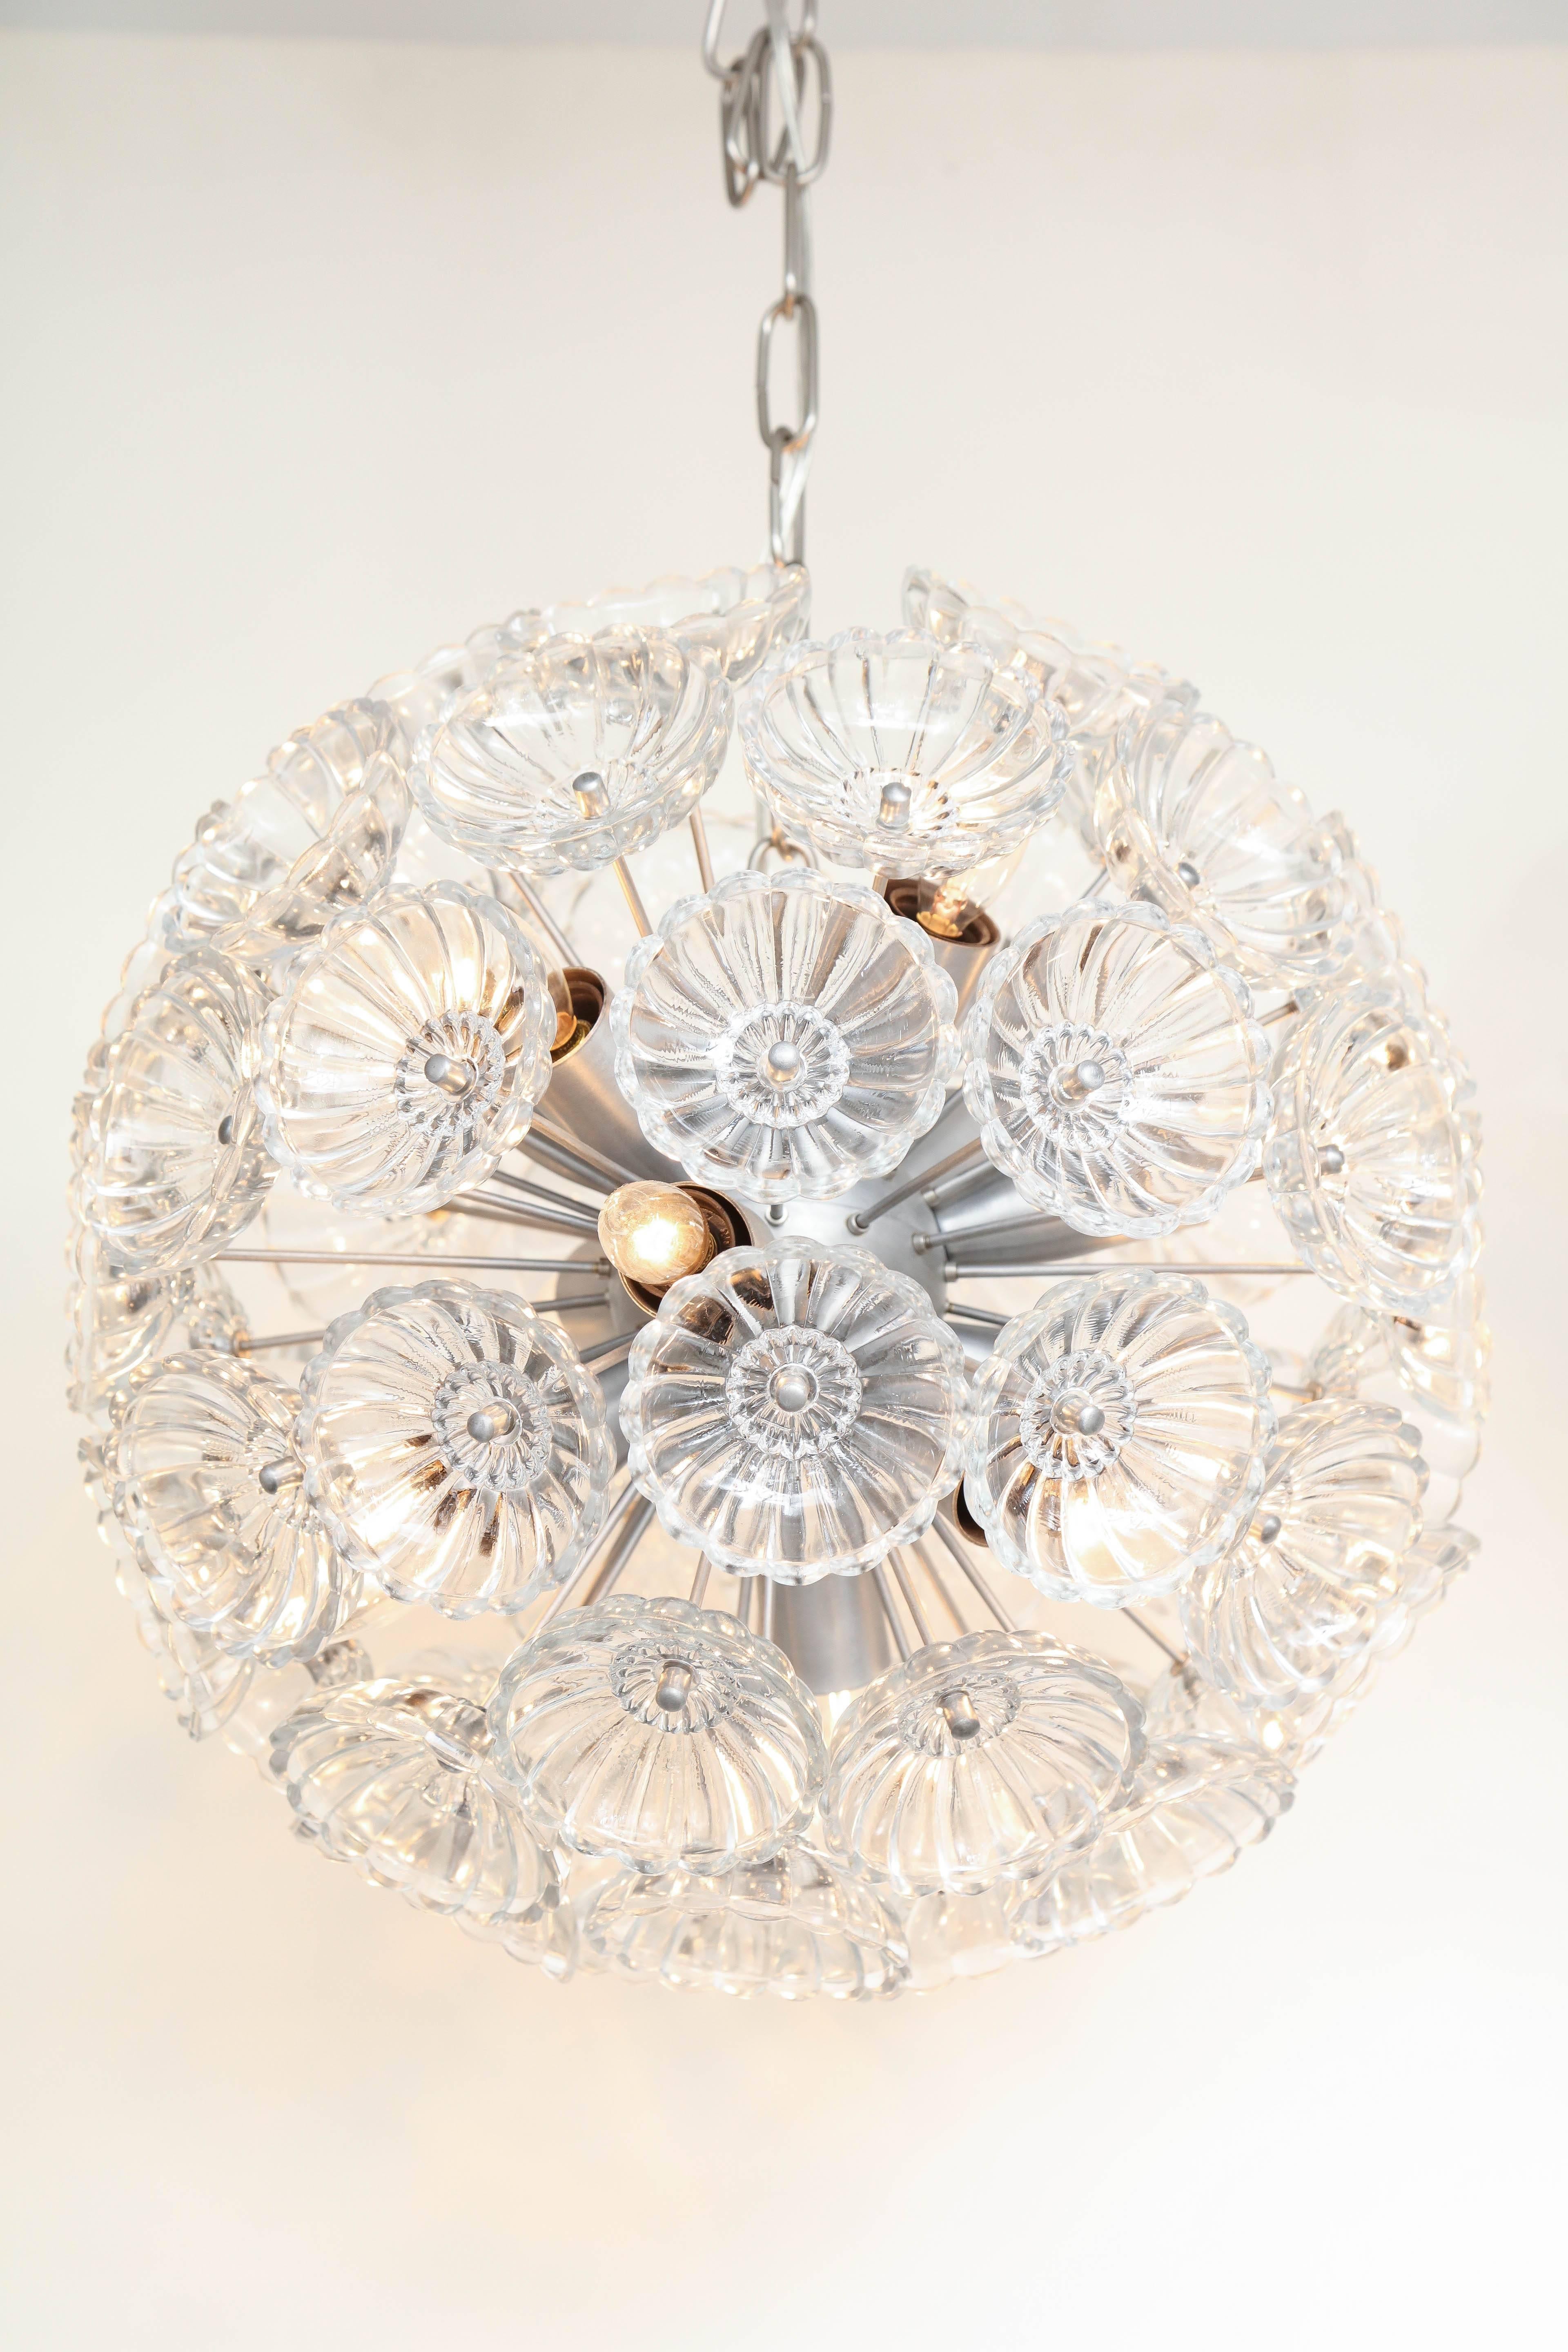 Mid-Century Sputnik chandelier with stylized glass flower elements on a brushed nickel frame. Rewired for use in the USA. Currently a pair is available.